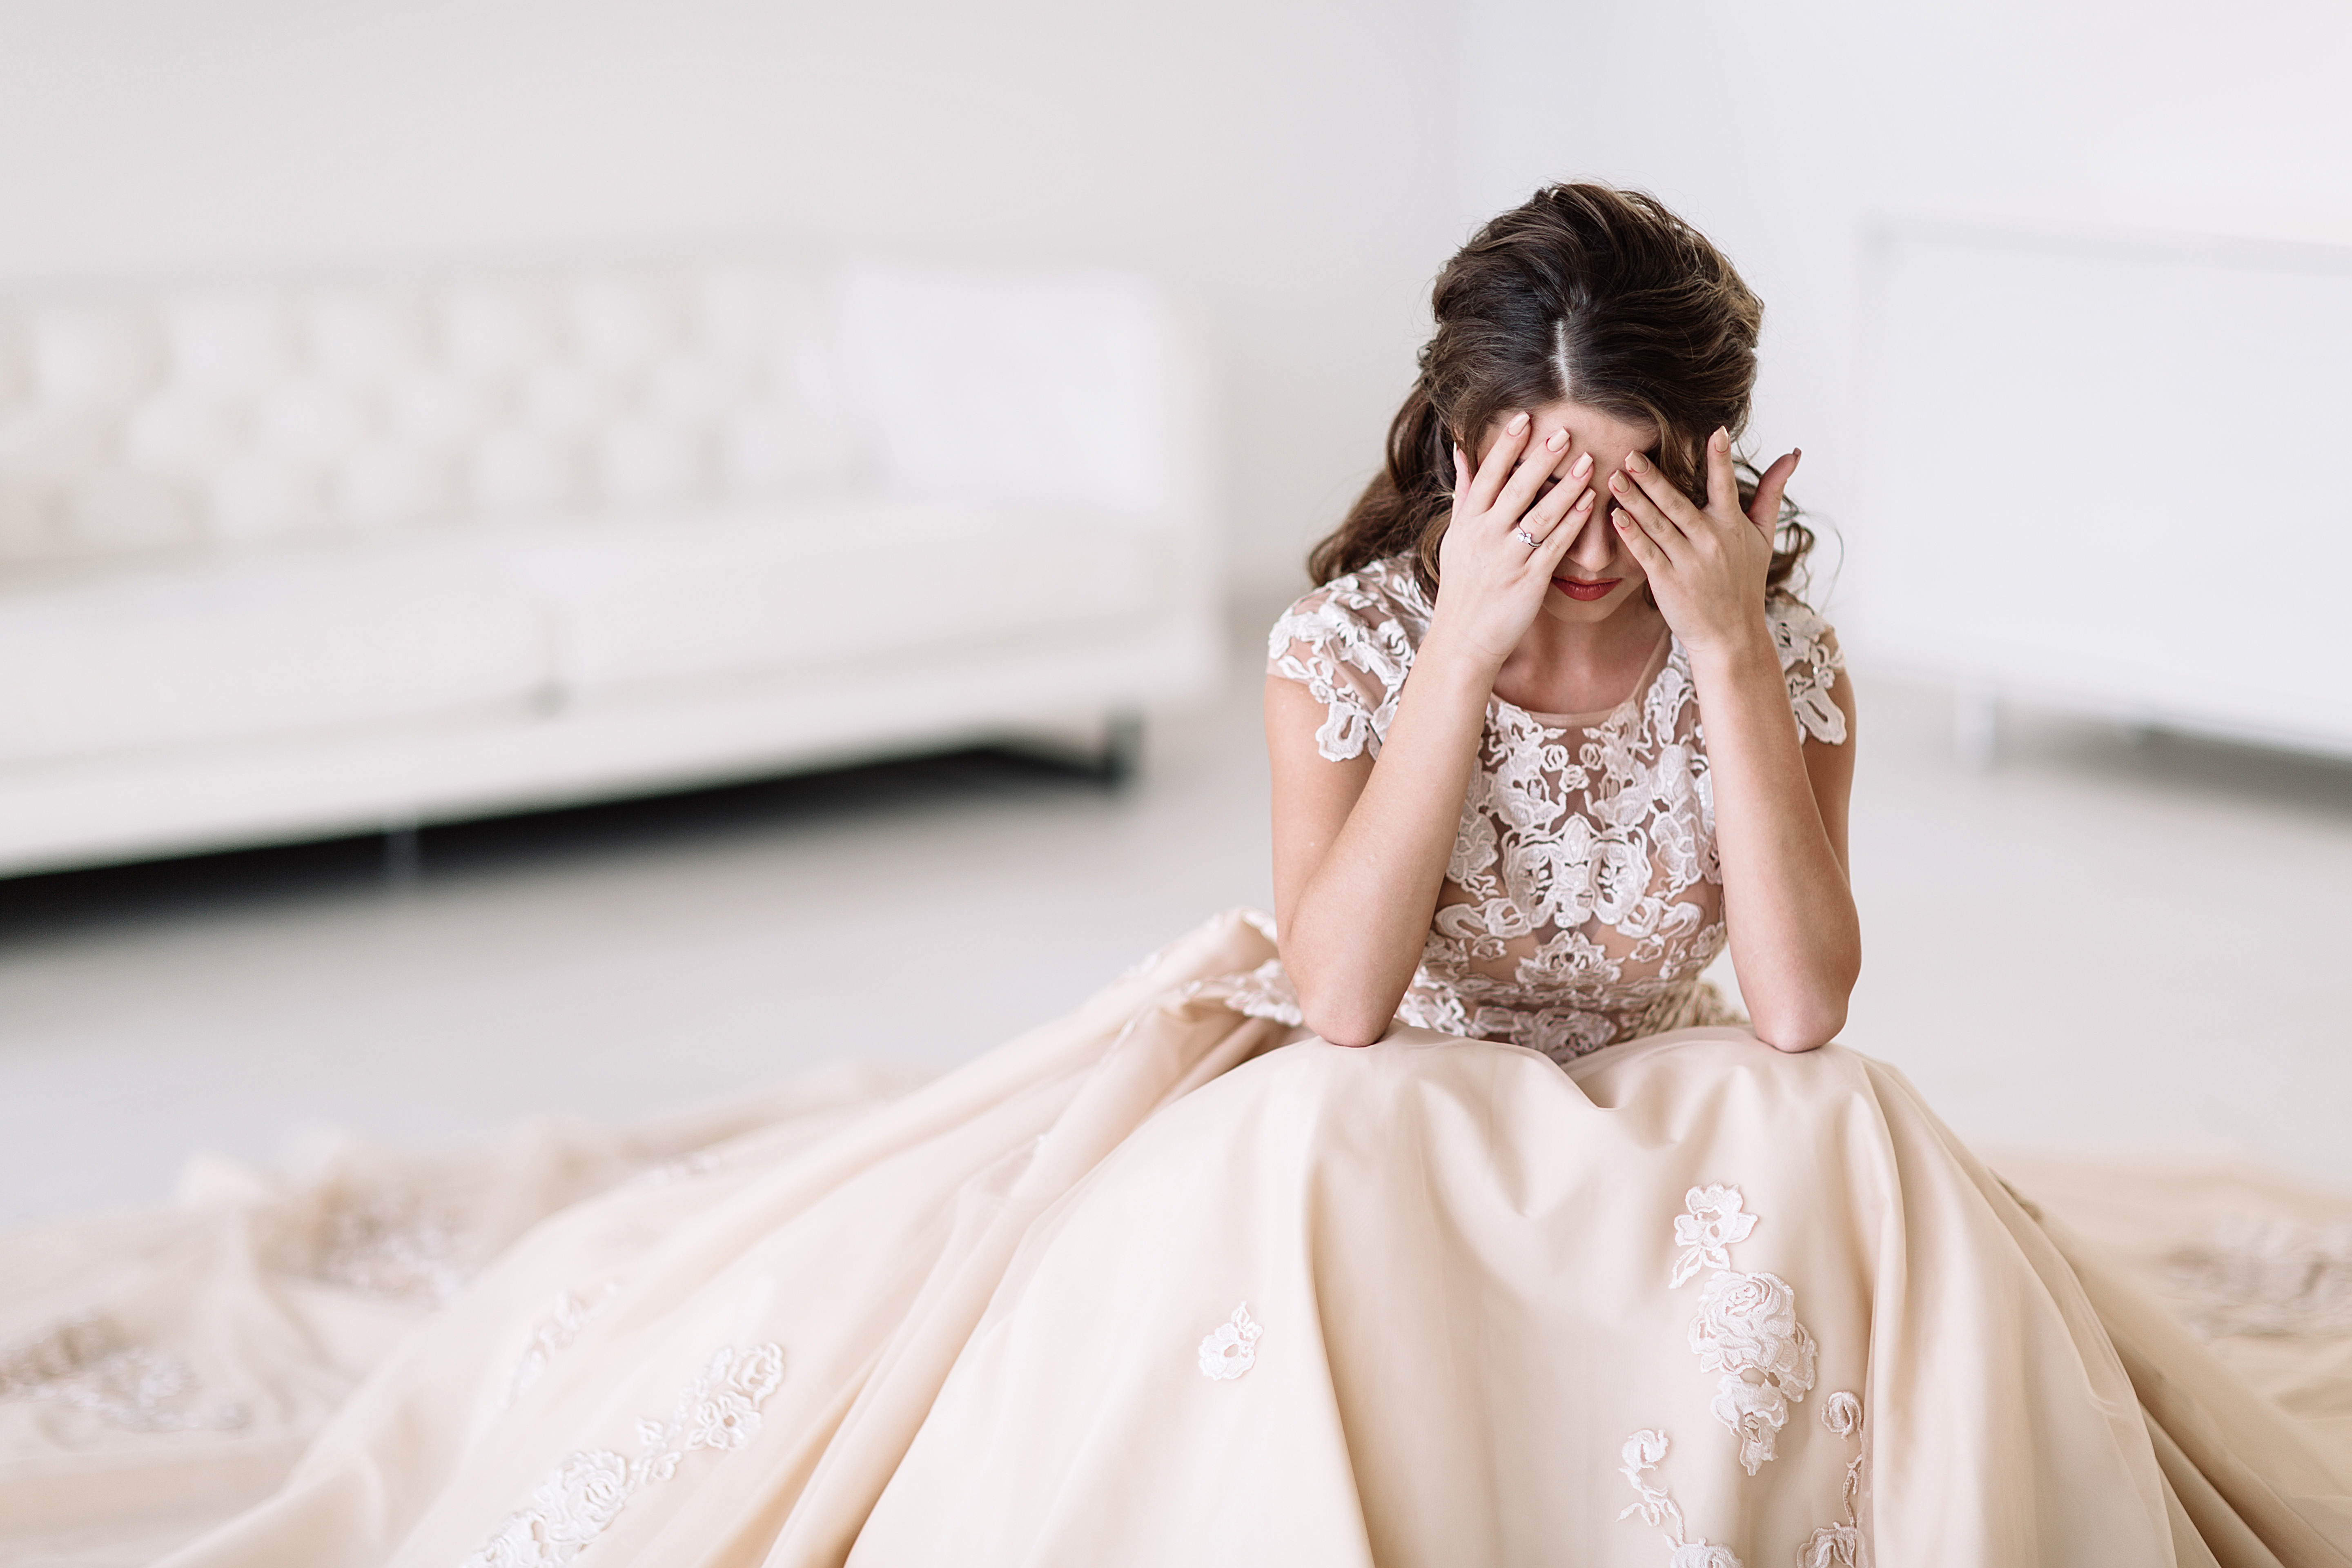 A sad bride covering her eyes | Source: Shutterstock